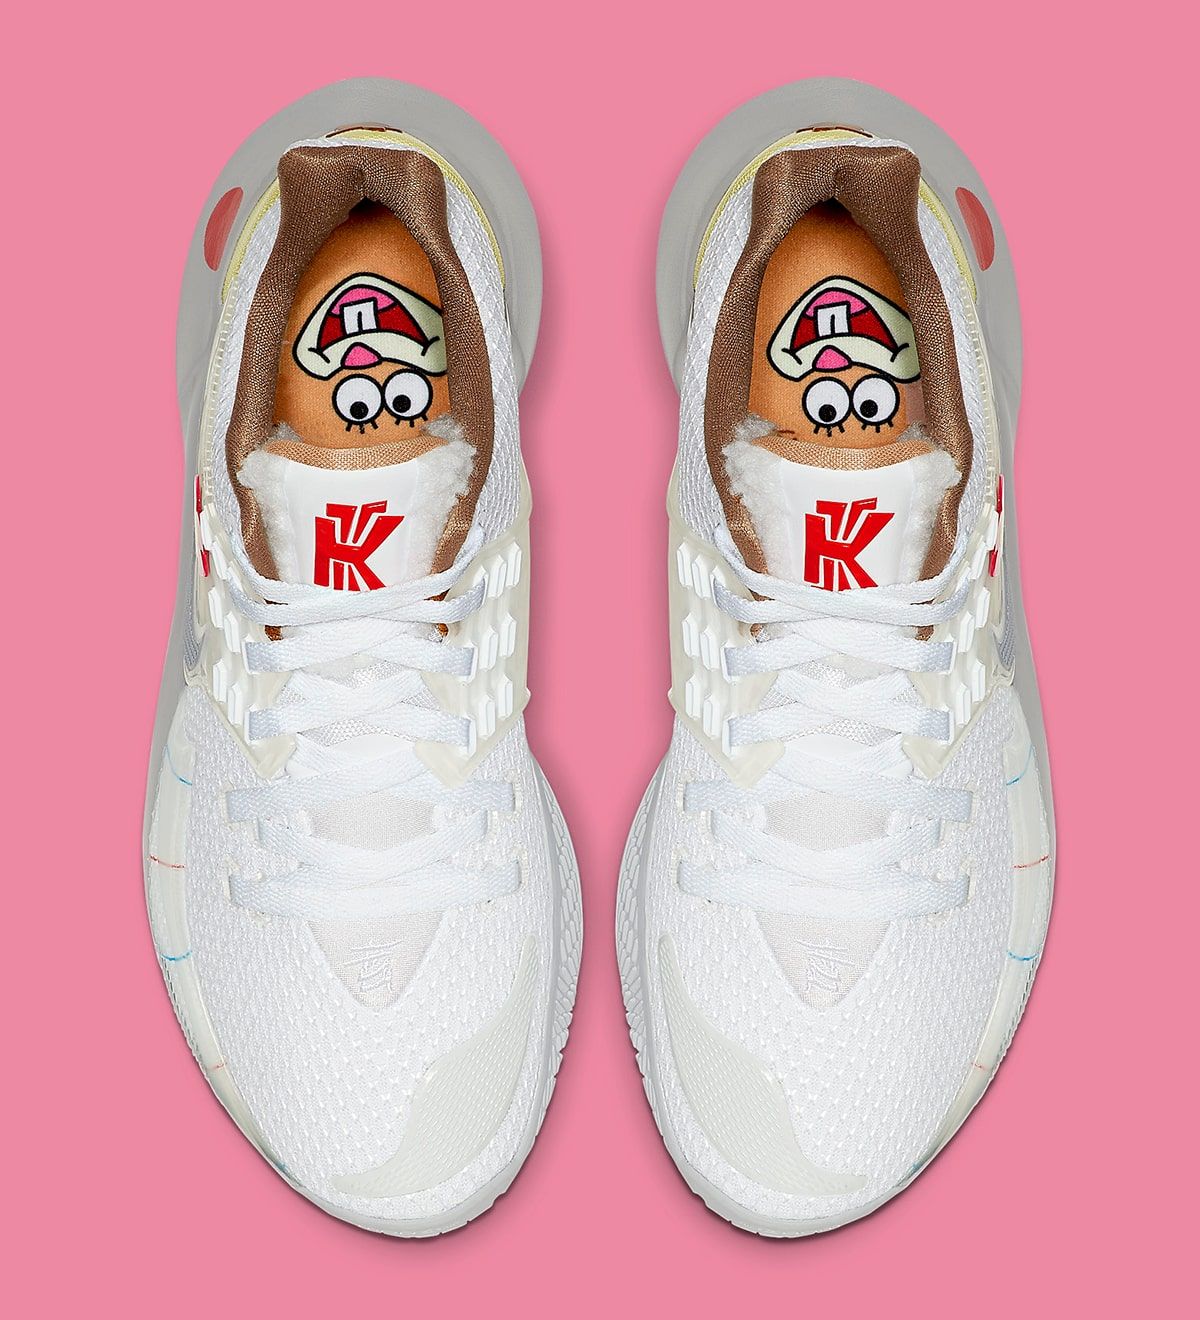 to Buy the x Nike Kyrie Low 2 “Sandy Cheeks” | House of Heat°